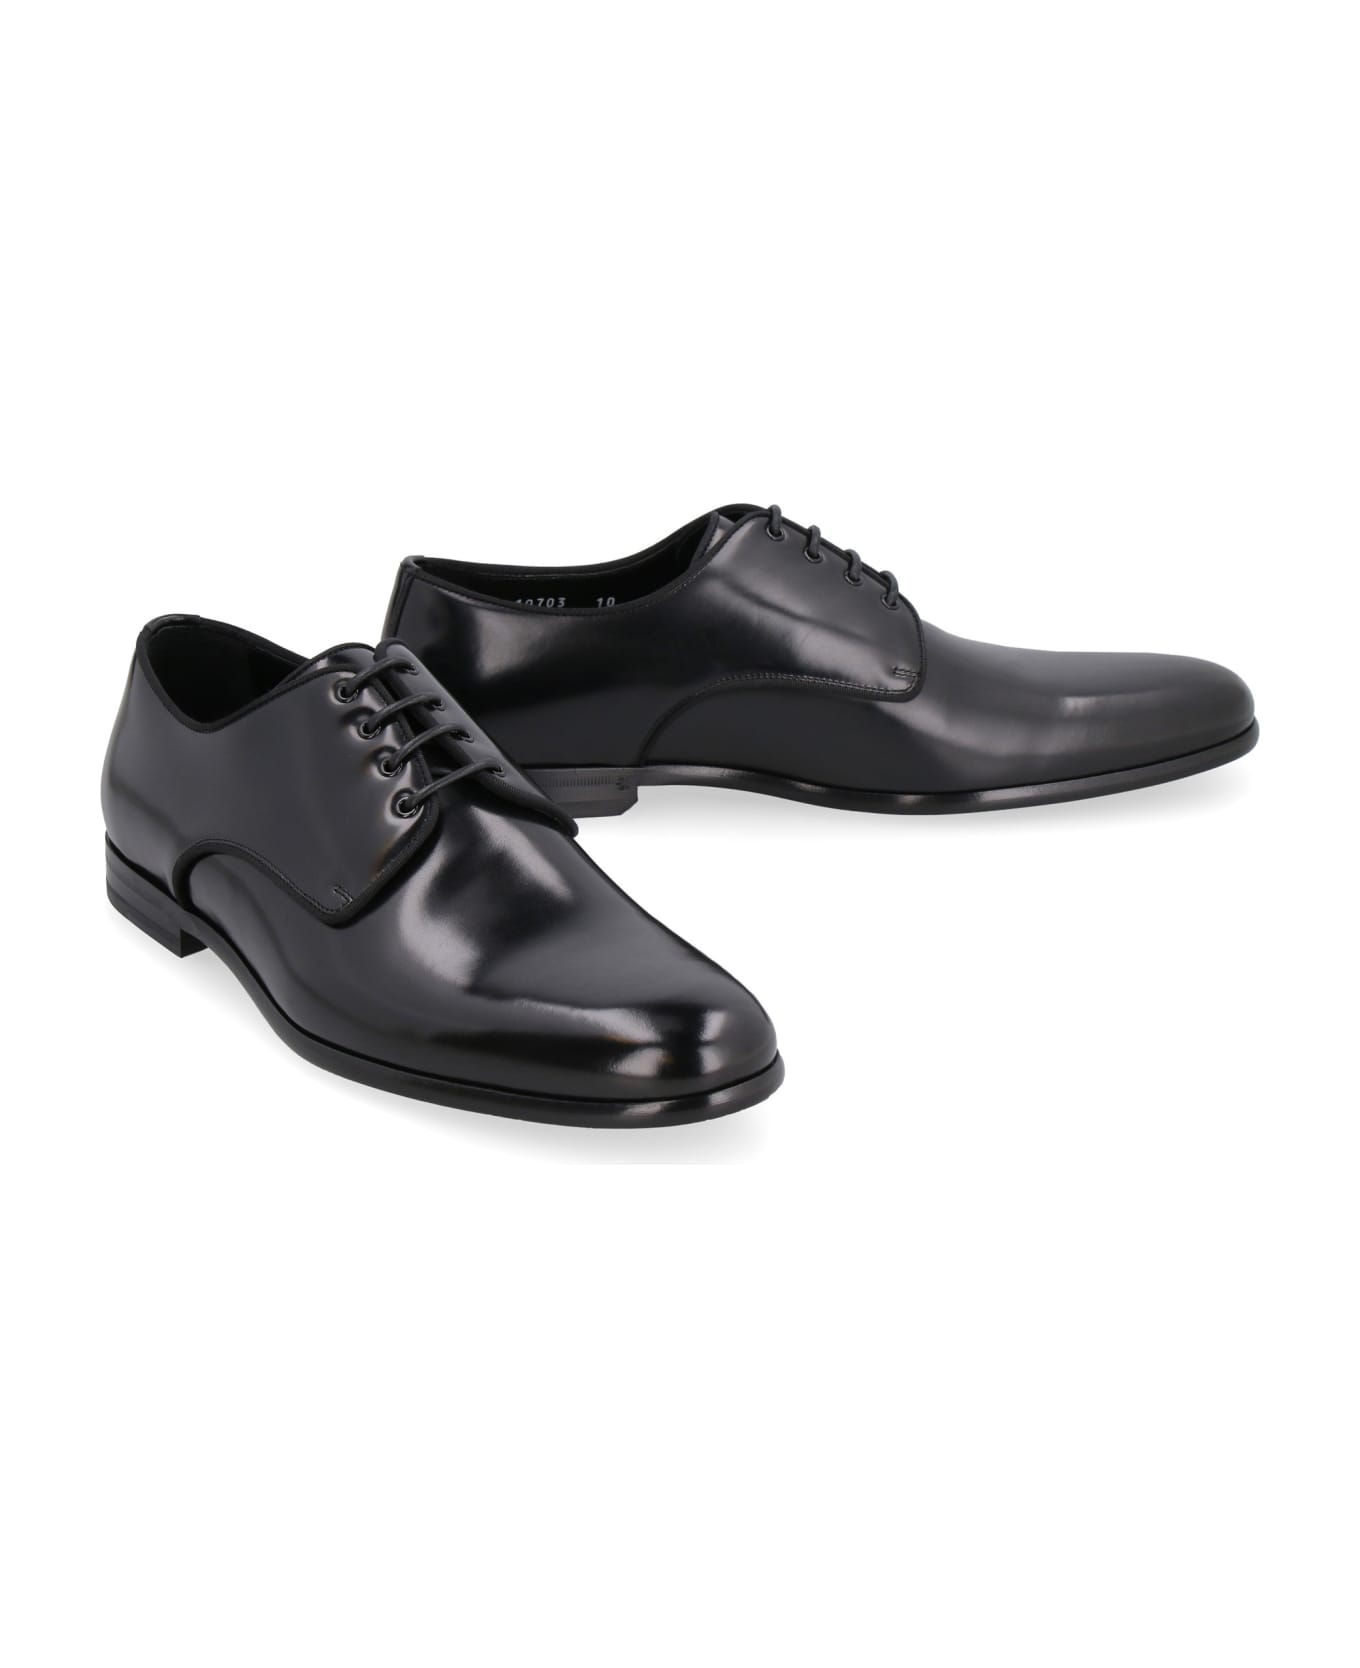 Dolce & Gabbana Leather Lace-up Derby Shoes - black